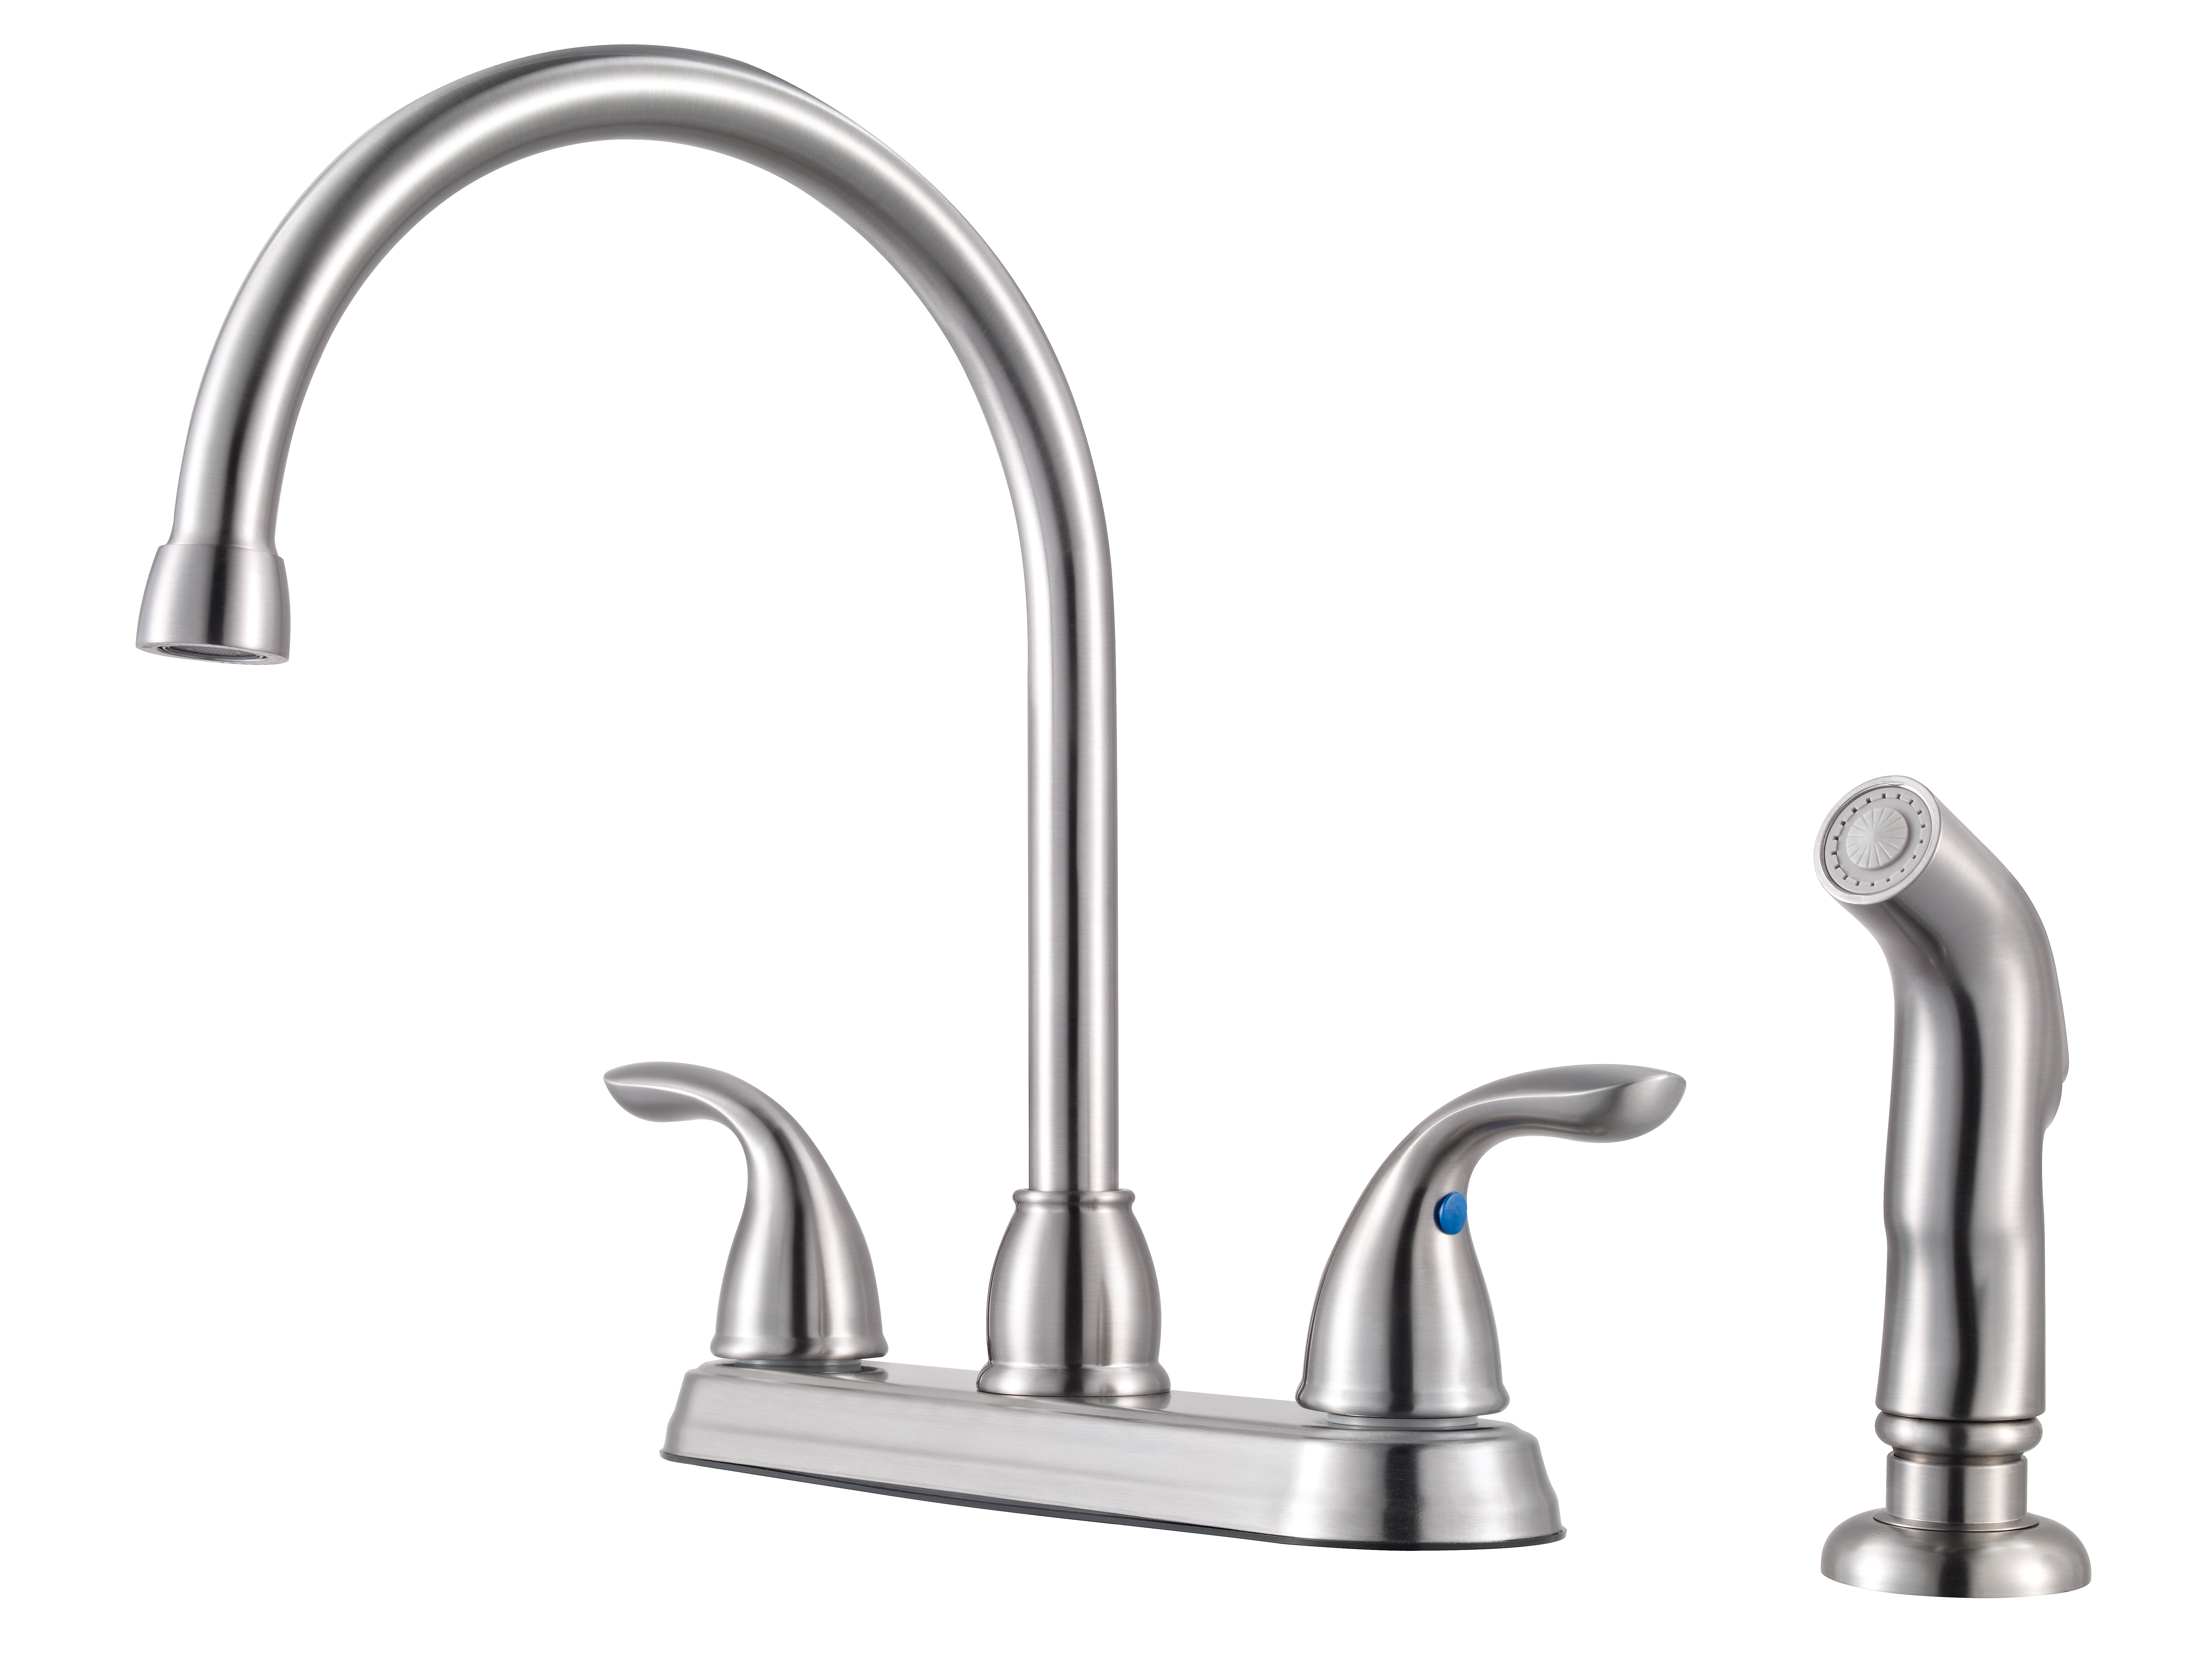 Pfister Double Handle Kitchen Faucet With Side Spray Reviews Wayfair